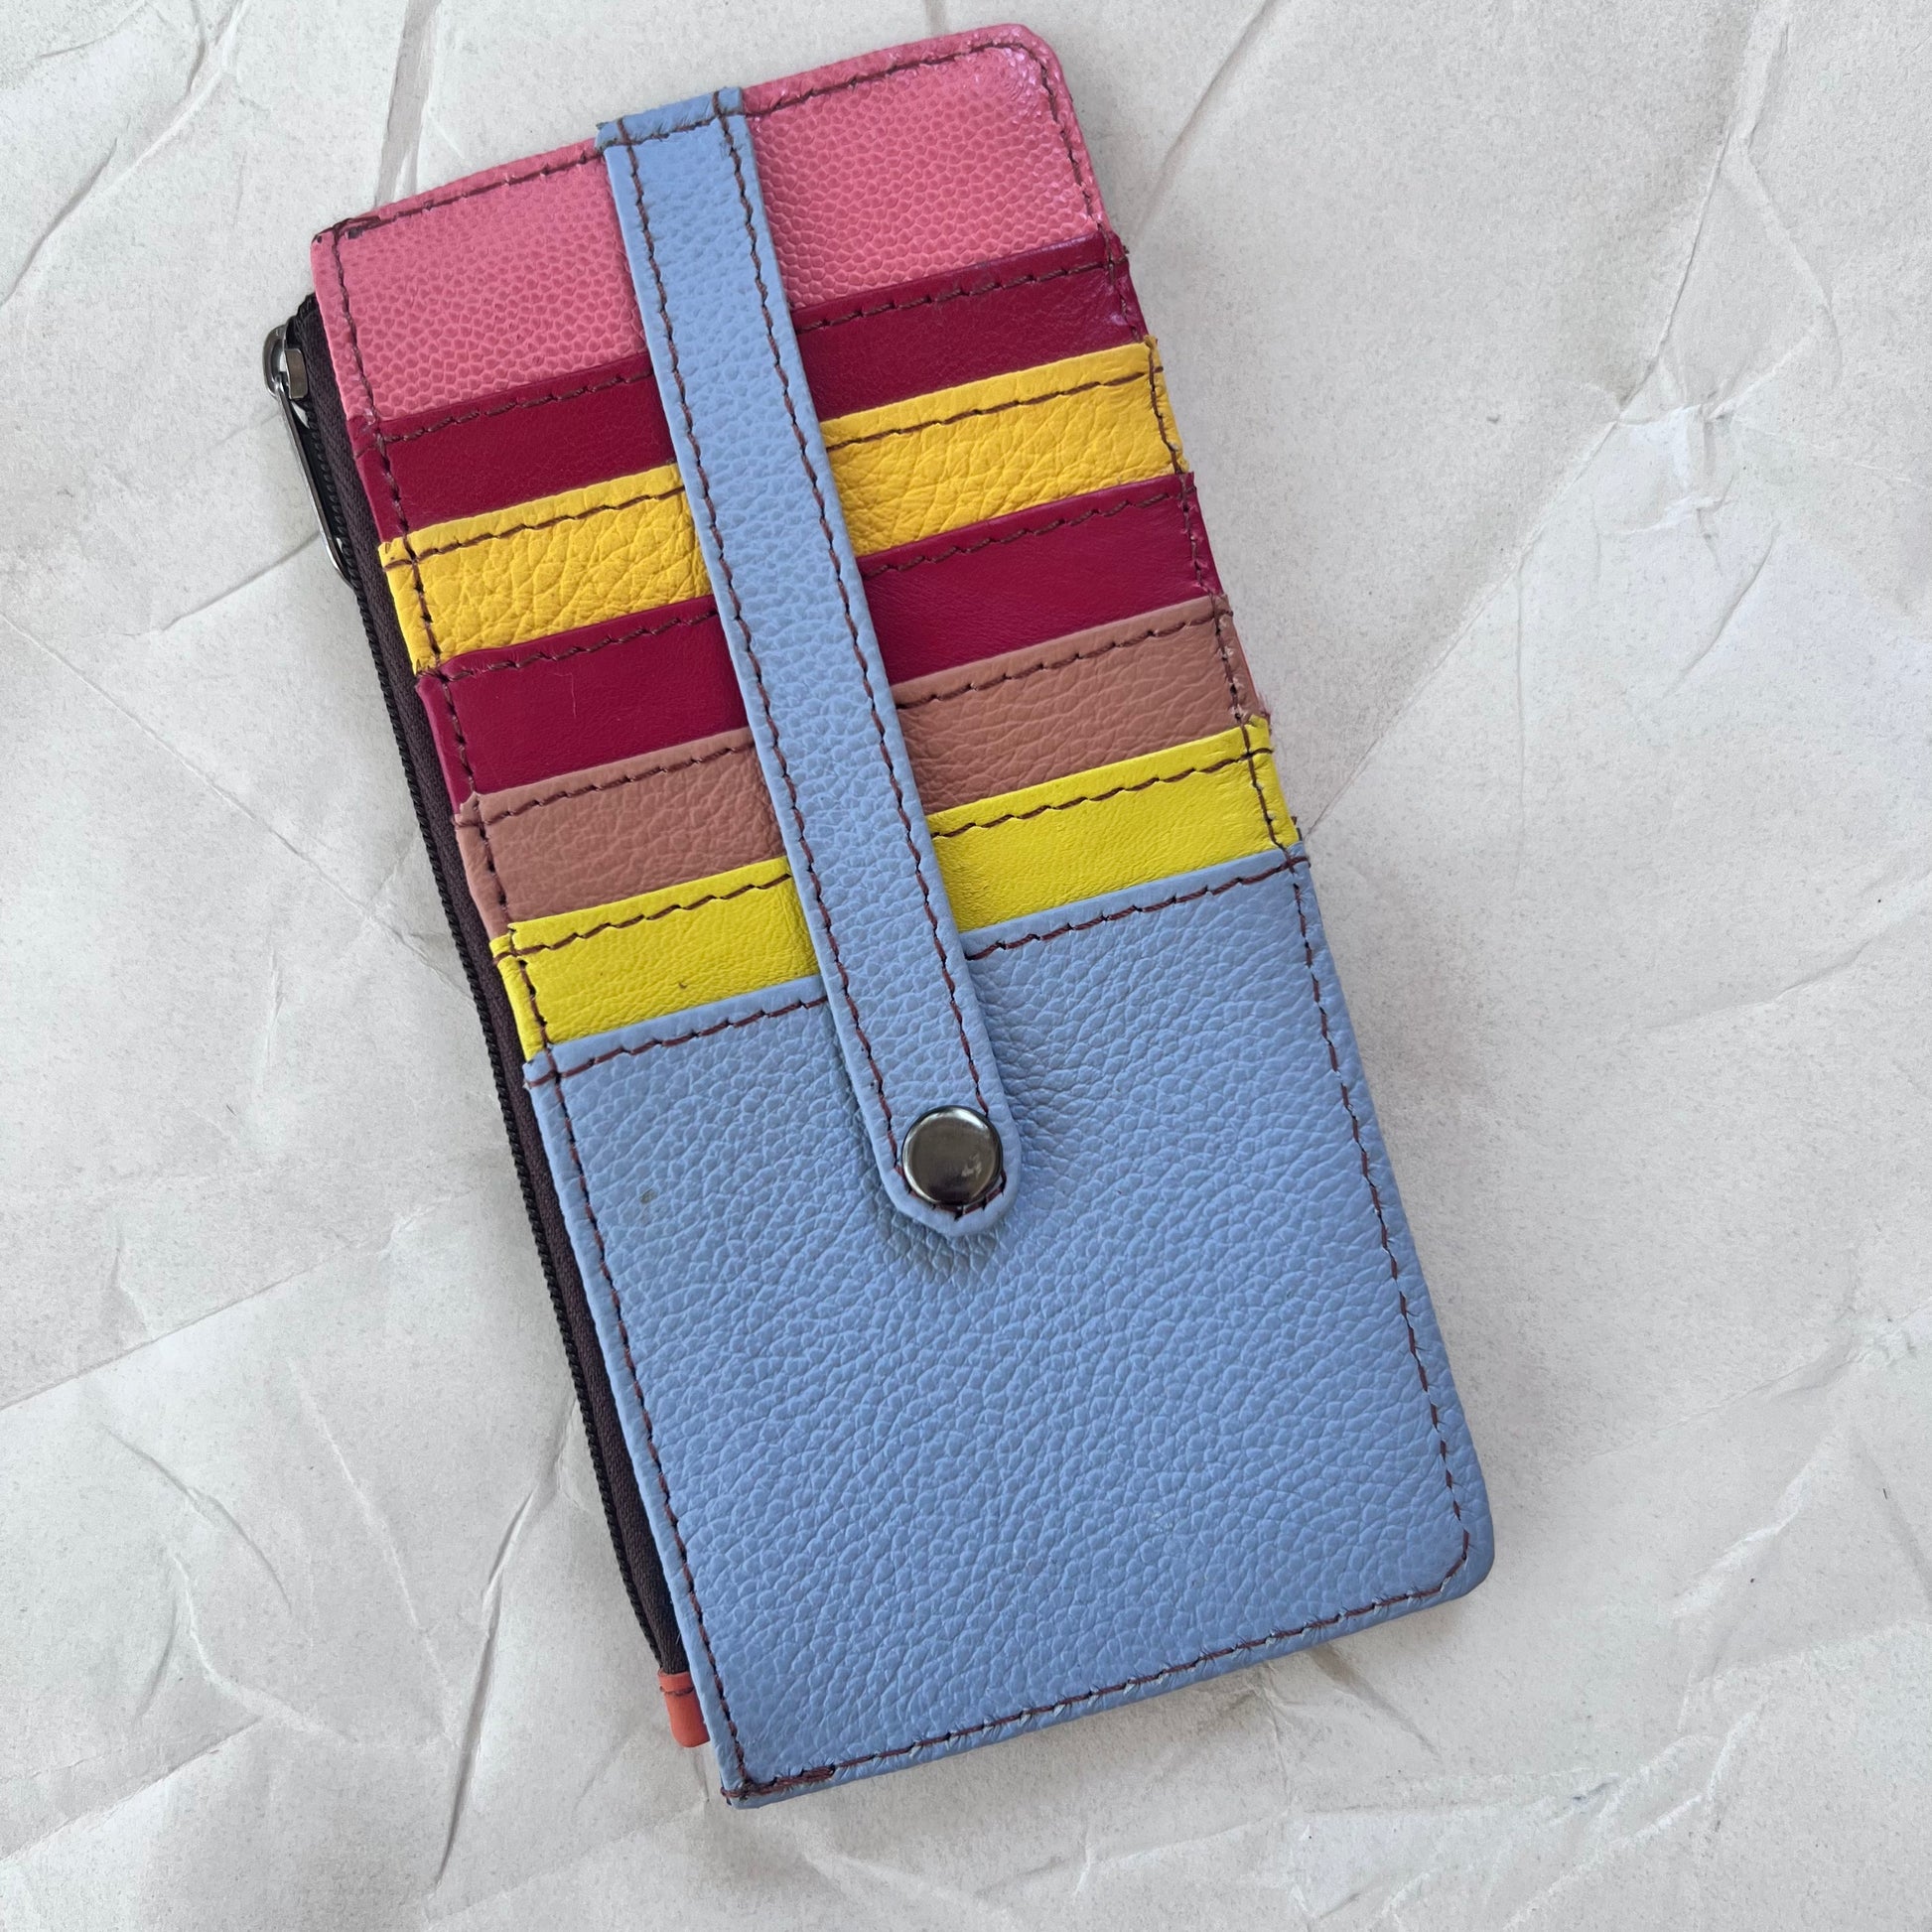 cassie card holder with yellow, pinks, red and blue card slots.